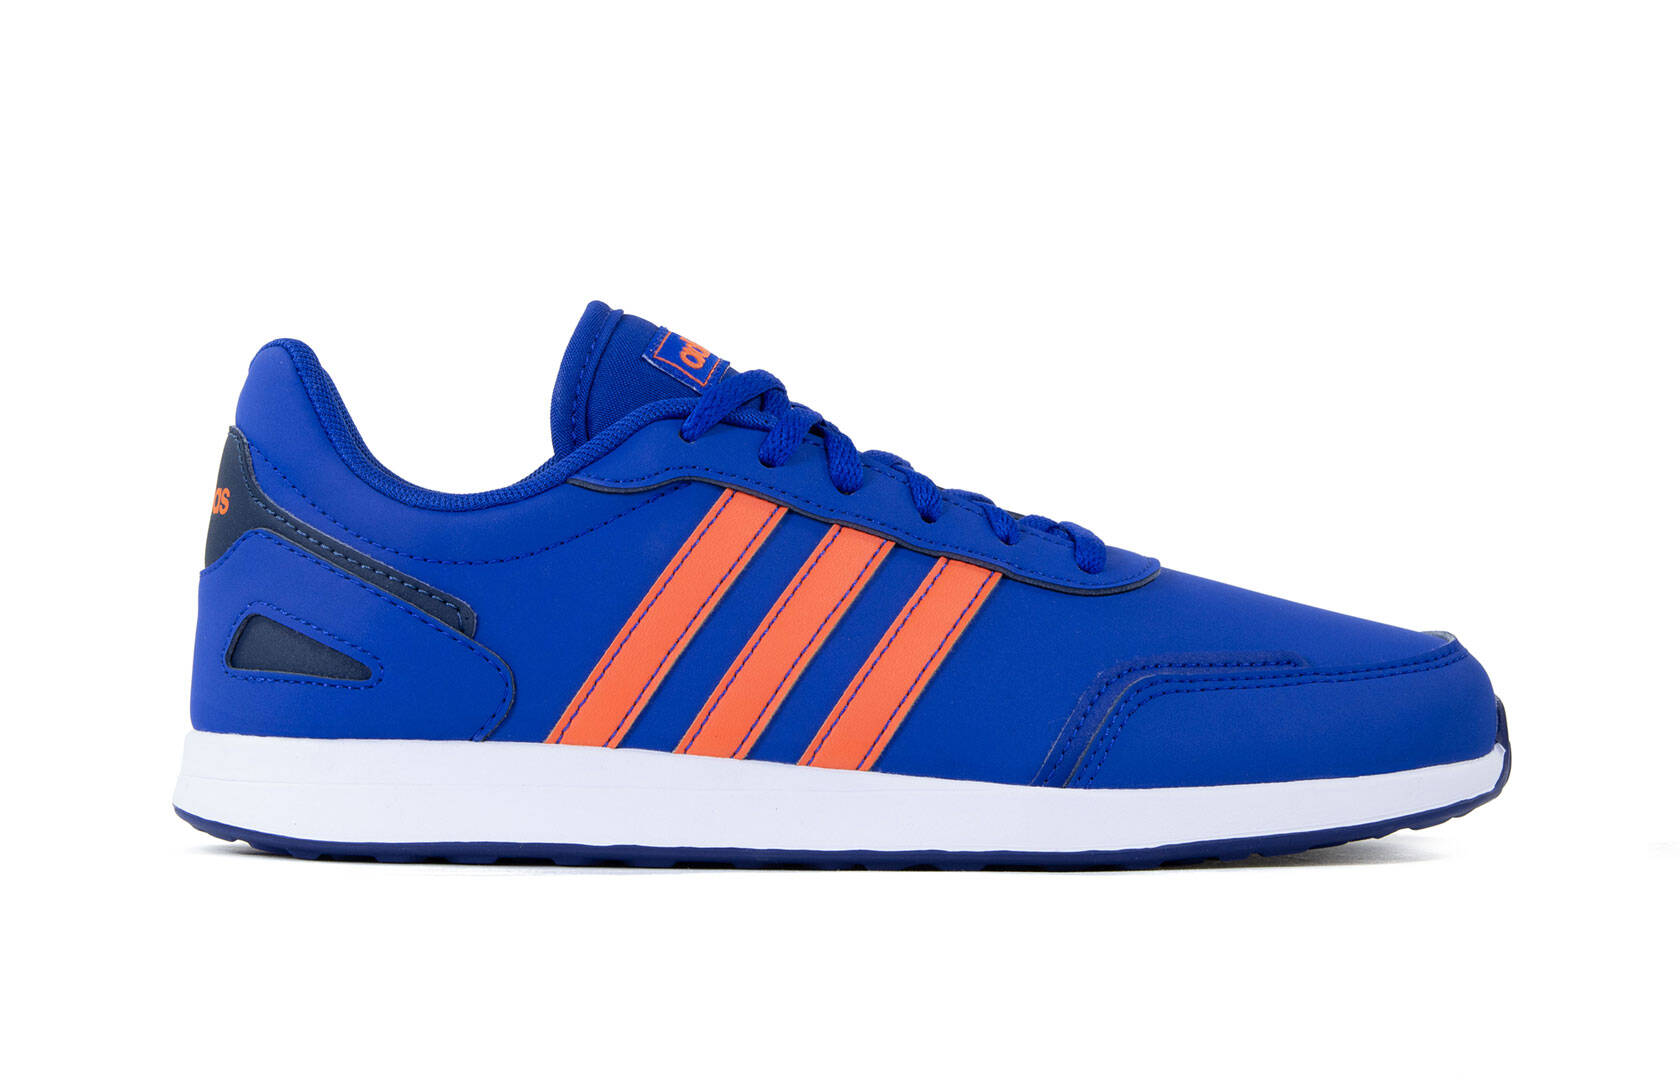 Adidas VS SWITCH 3 K youth shoes FY7259